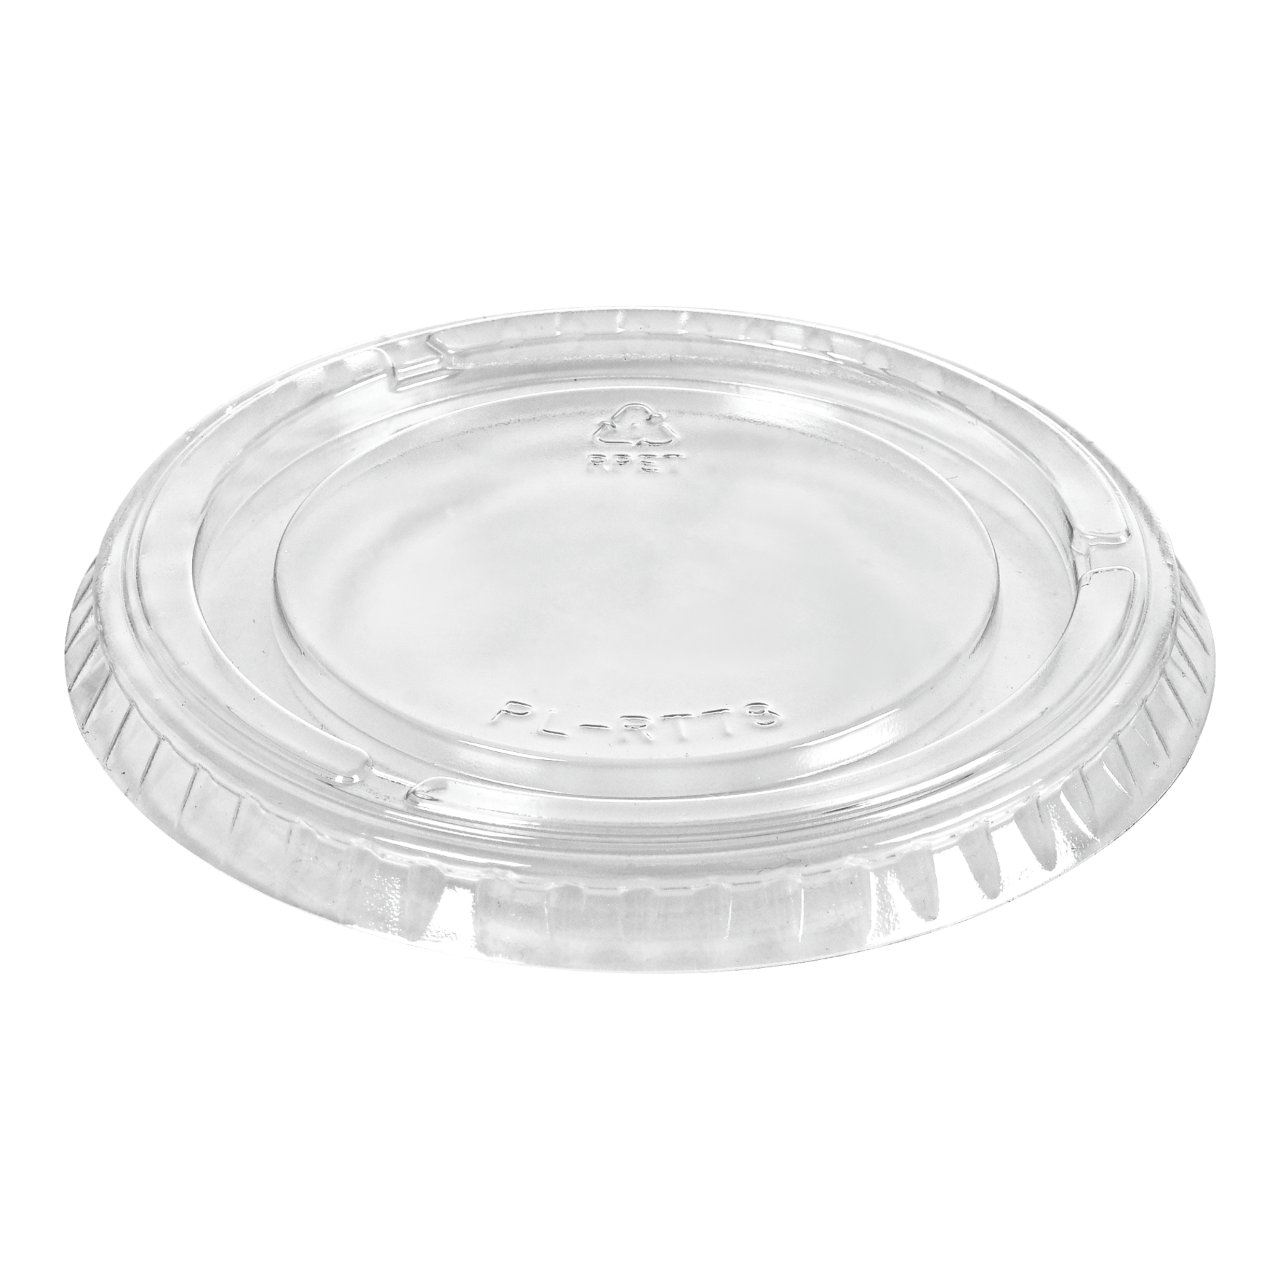 Cup rPET lid 100/120ml, transparant